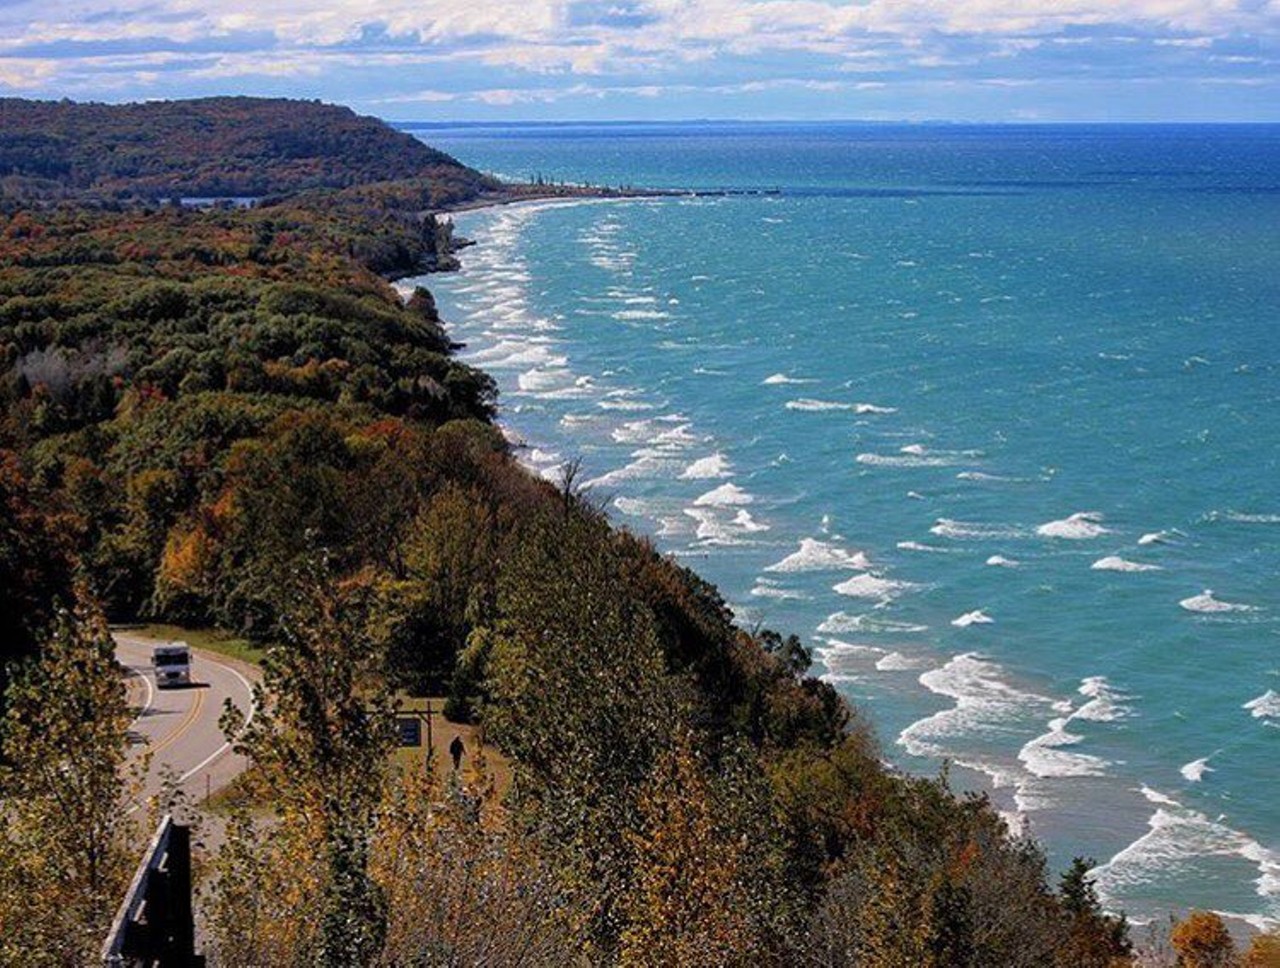 Arcadia
4  hours from Detroit 
What&#146;s great about it: Located along Lake Michigan, Arcadia has sandy beaches and areas for boating and fishing, and anyone who&#146;s been there wouldn&#146;t be surprised to know the town was nominated Michigan&#146;s most scenic drive by National Geographic for Traveler Magazine. 
Places to check out: Arcadia Beach 
Photo via enjoymichigan, Instagram